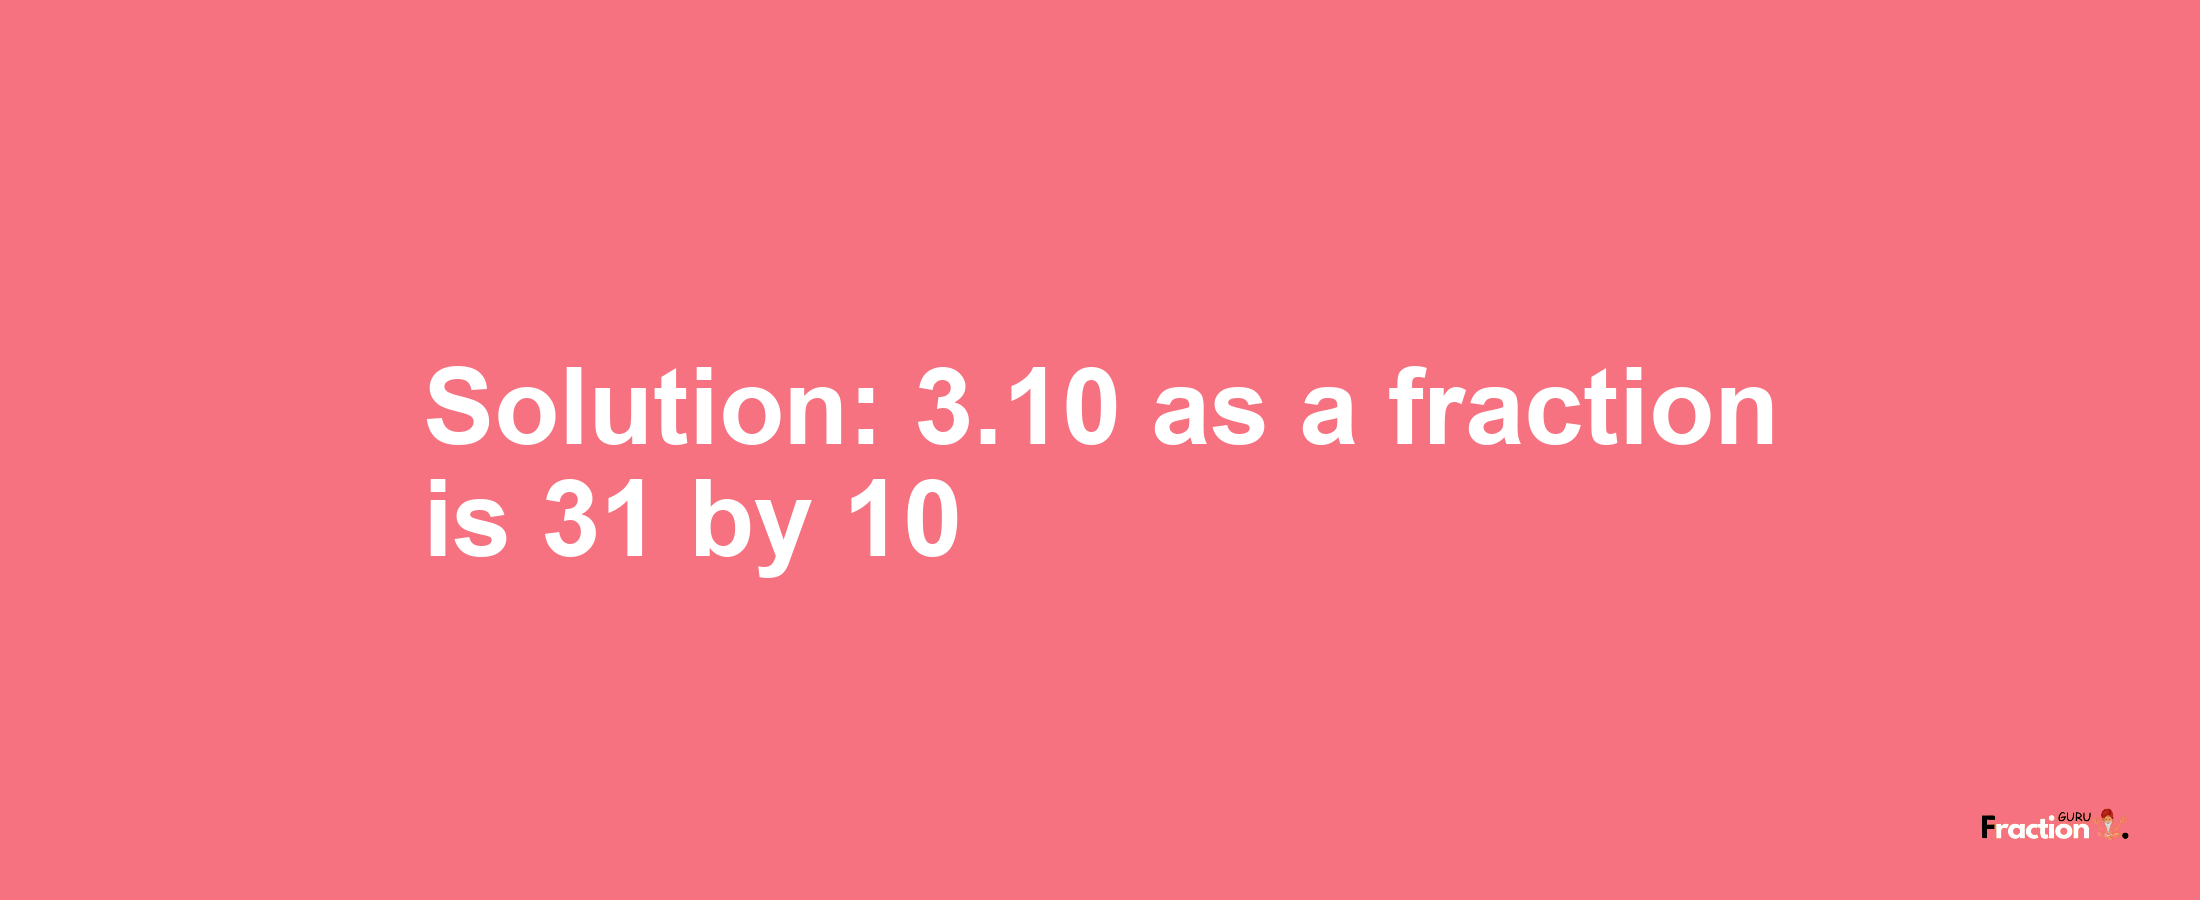 Solution:3.10 as a fraction is 31/10